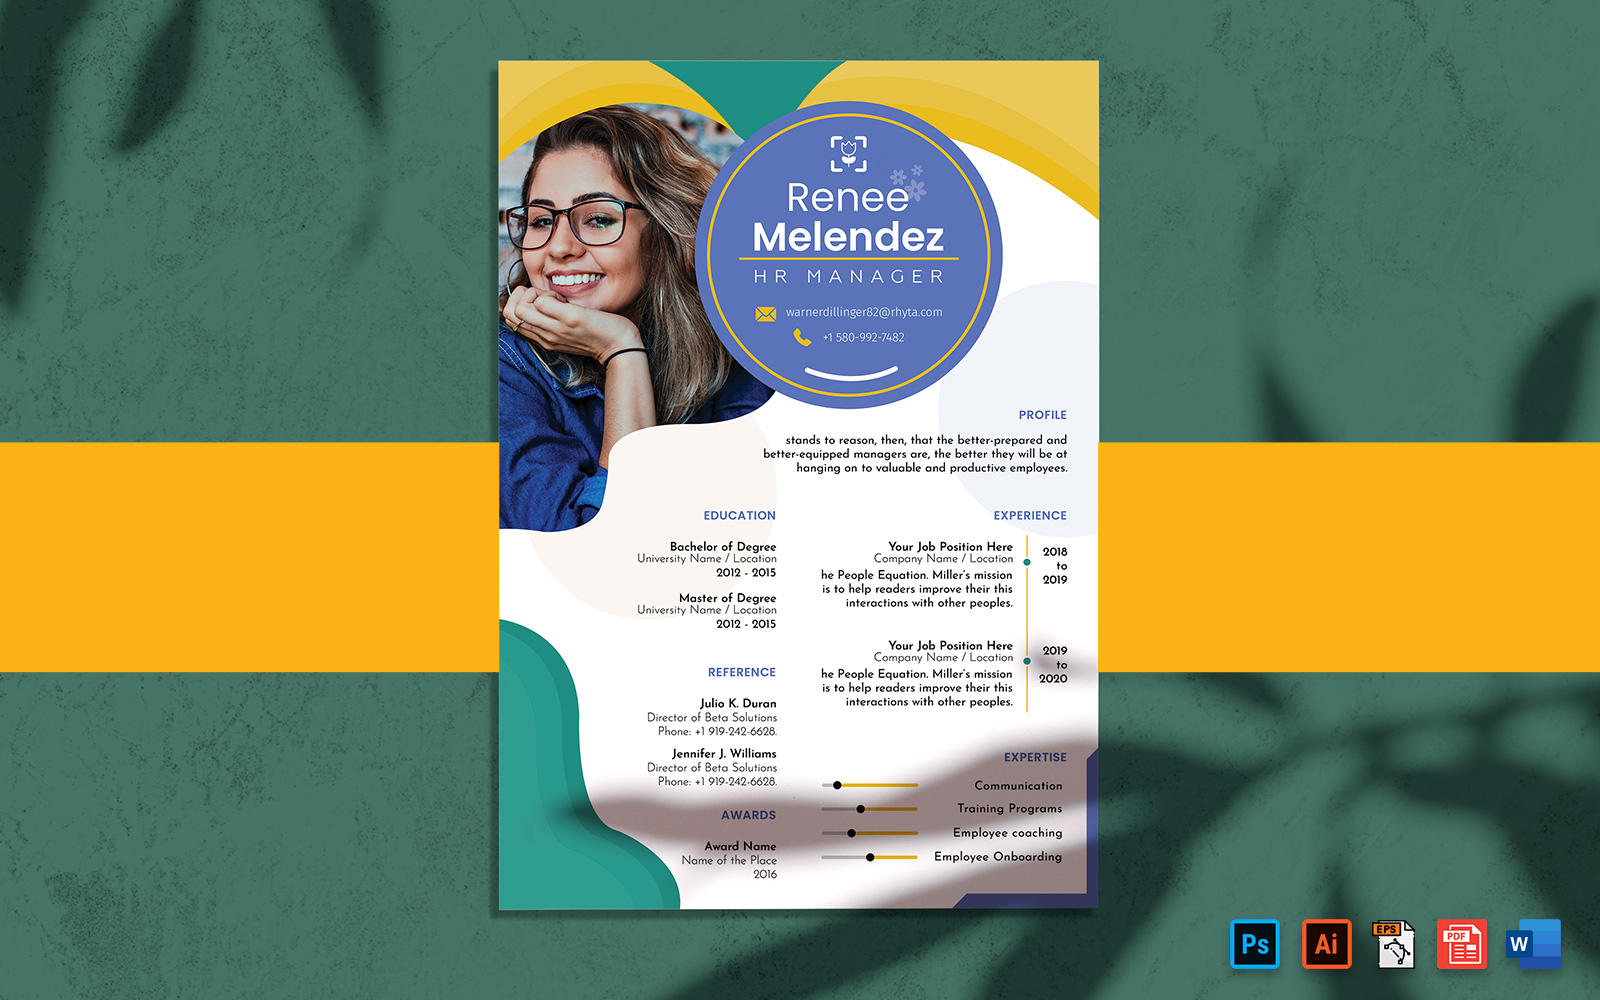 HR Manager CV Resume A4 Print Template-02